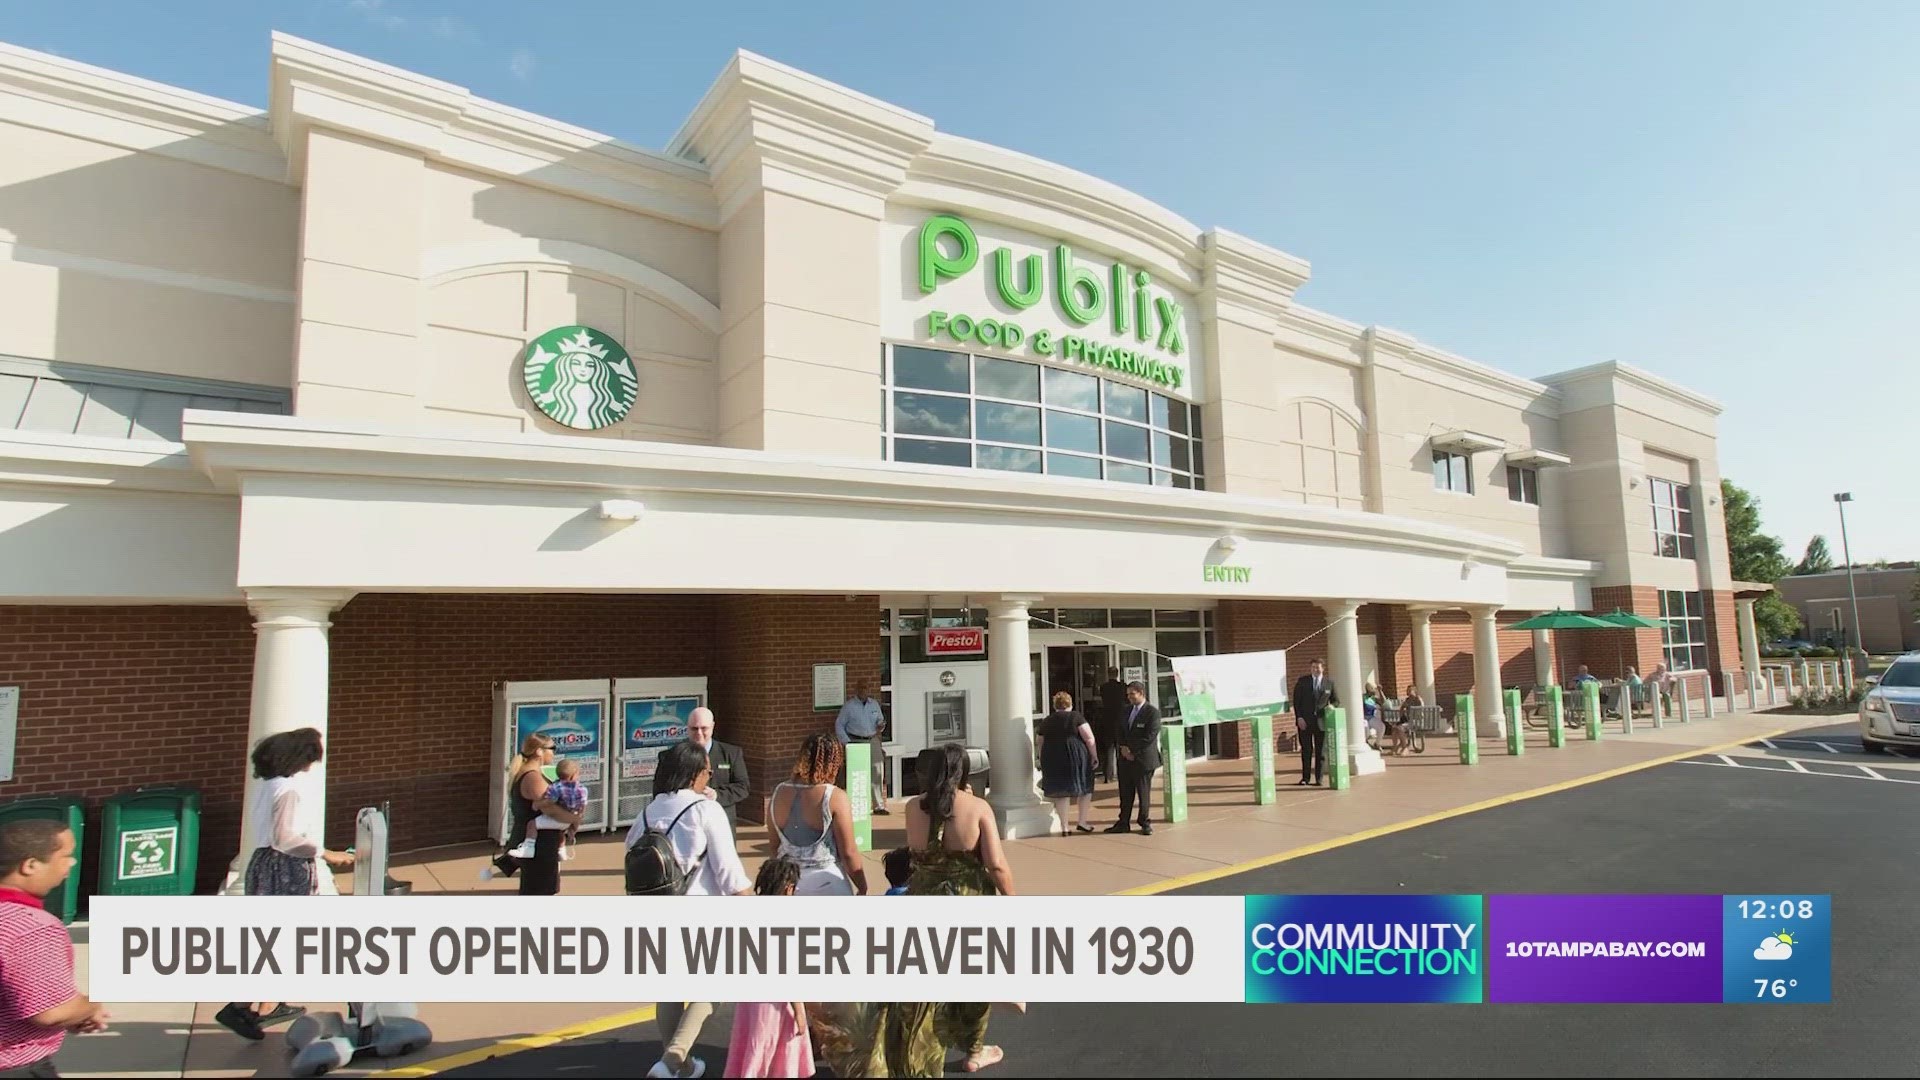 Publix opened its first store outside of Florida in 1991 in Savannah, Georgia. Now, they are going to debut its first store in Kentucky soon.